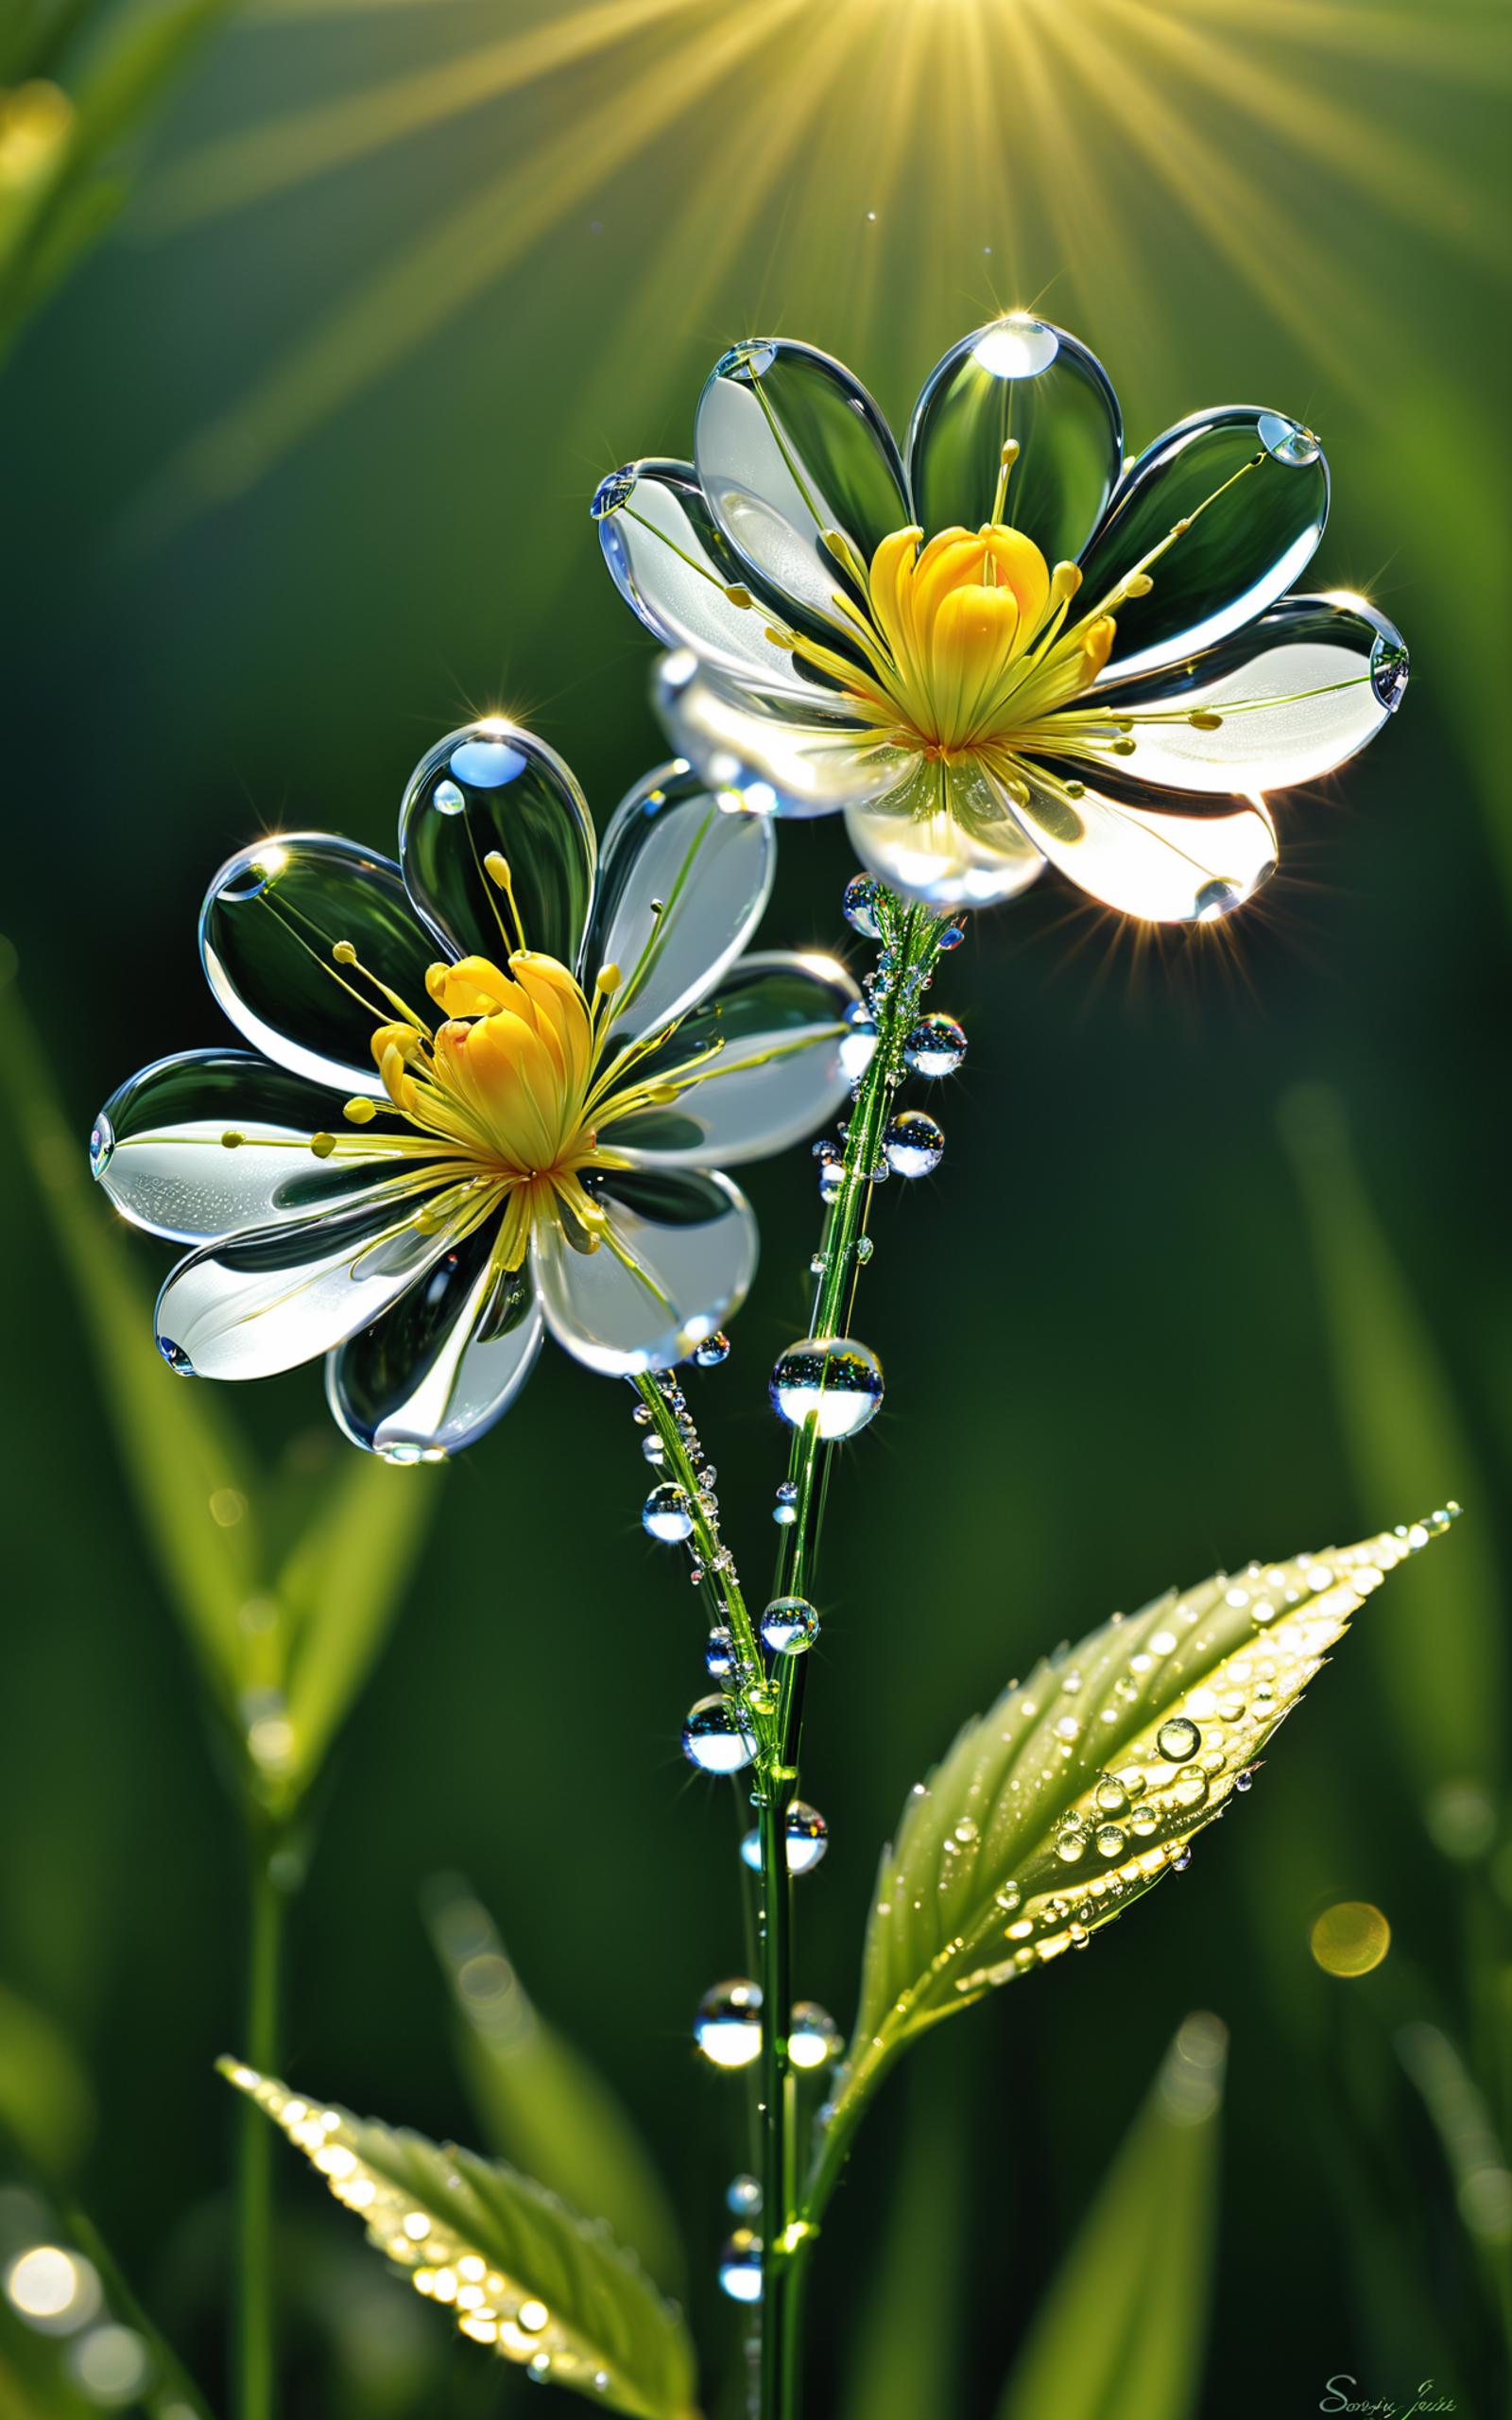 Droplets of water on a flower and a green leaf.